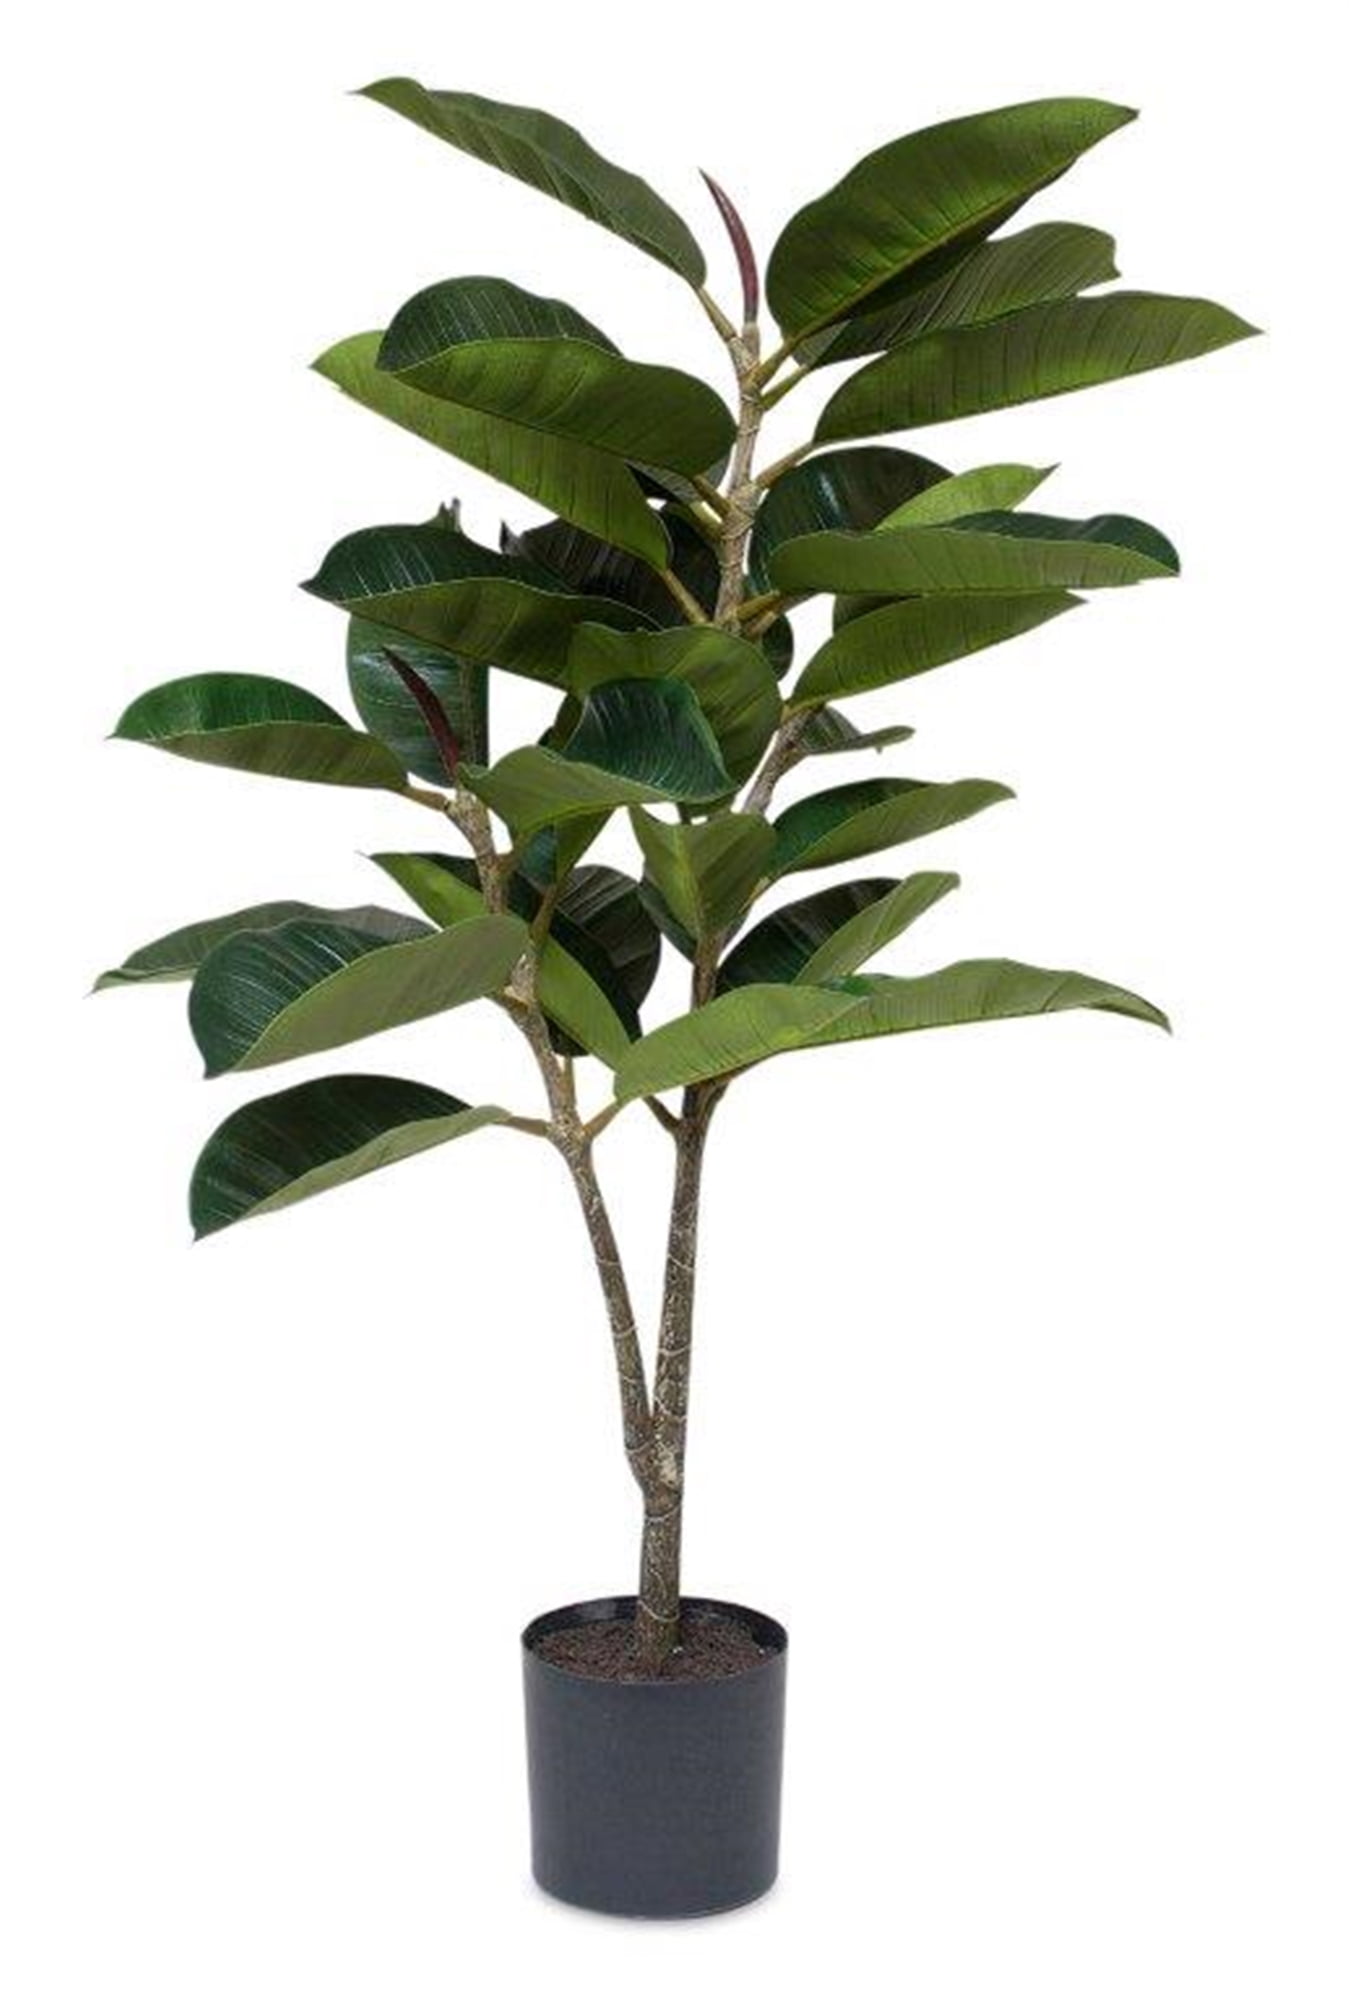 Potted Rubber Plant 45"H Polyester/Plastic